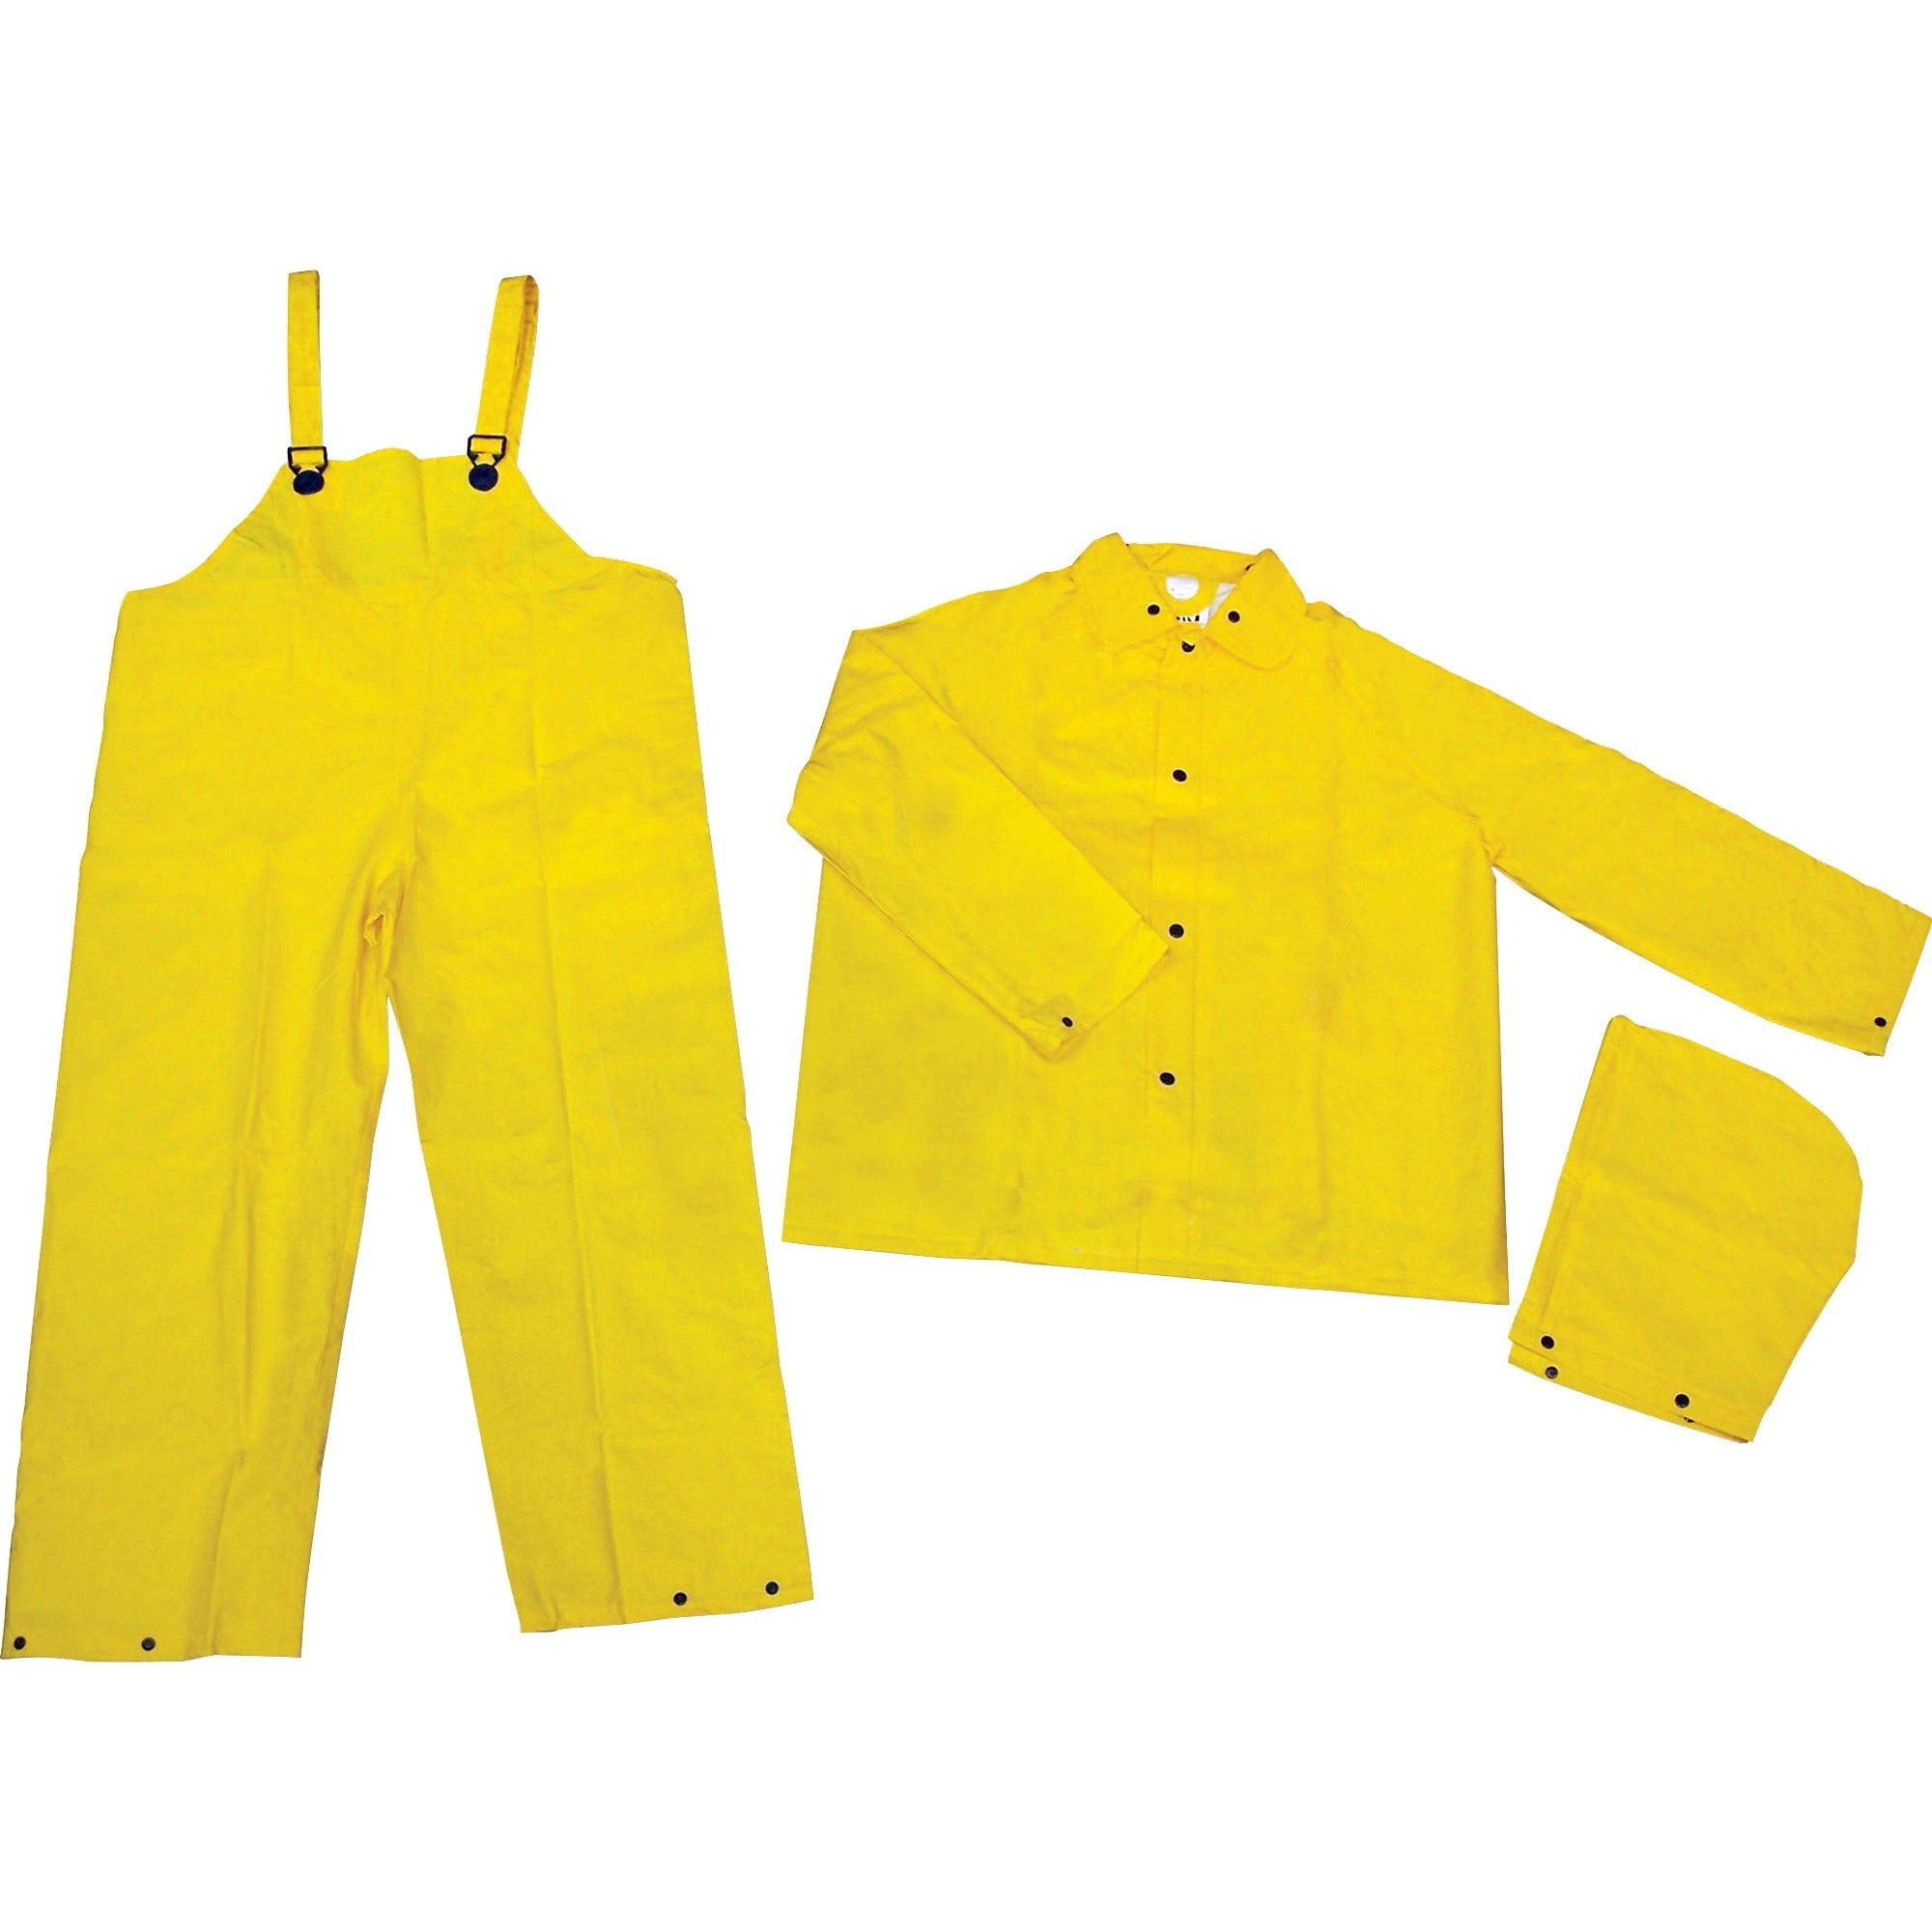 river-city-three-piece-rainsuit-recommended-for-agriculture-construction-transportation-sanitation-carpentry-landscaping-large-size-water-protection-snap-closure-polyester-polyvinyl-chloride-pvc-yellow-1-each_mcs2003l - 1